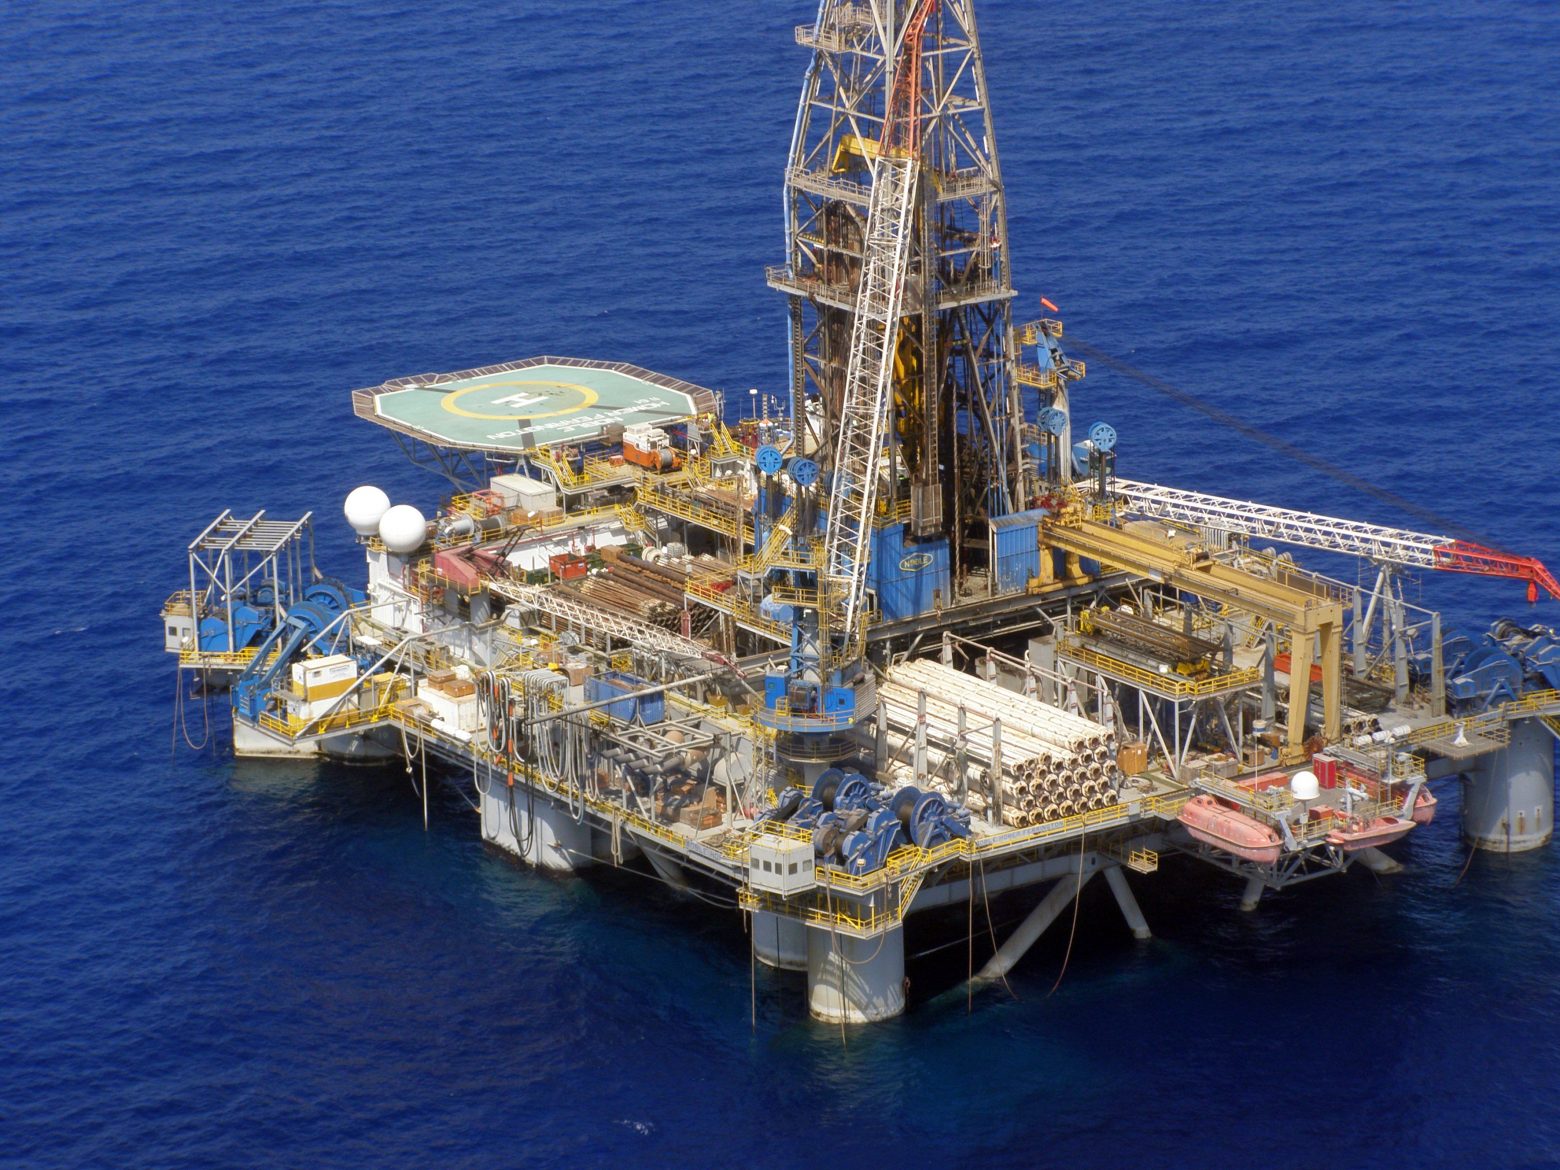 Cyprus’ hopes for “Aphrodite” gas field